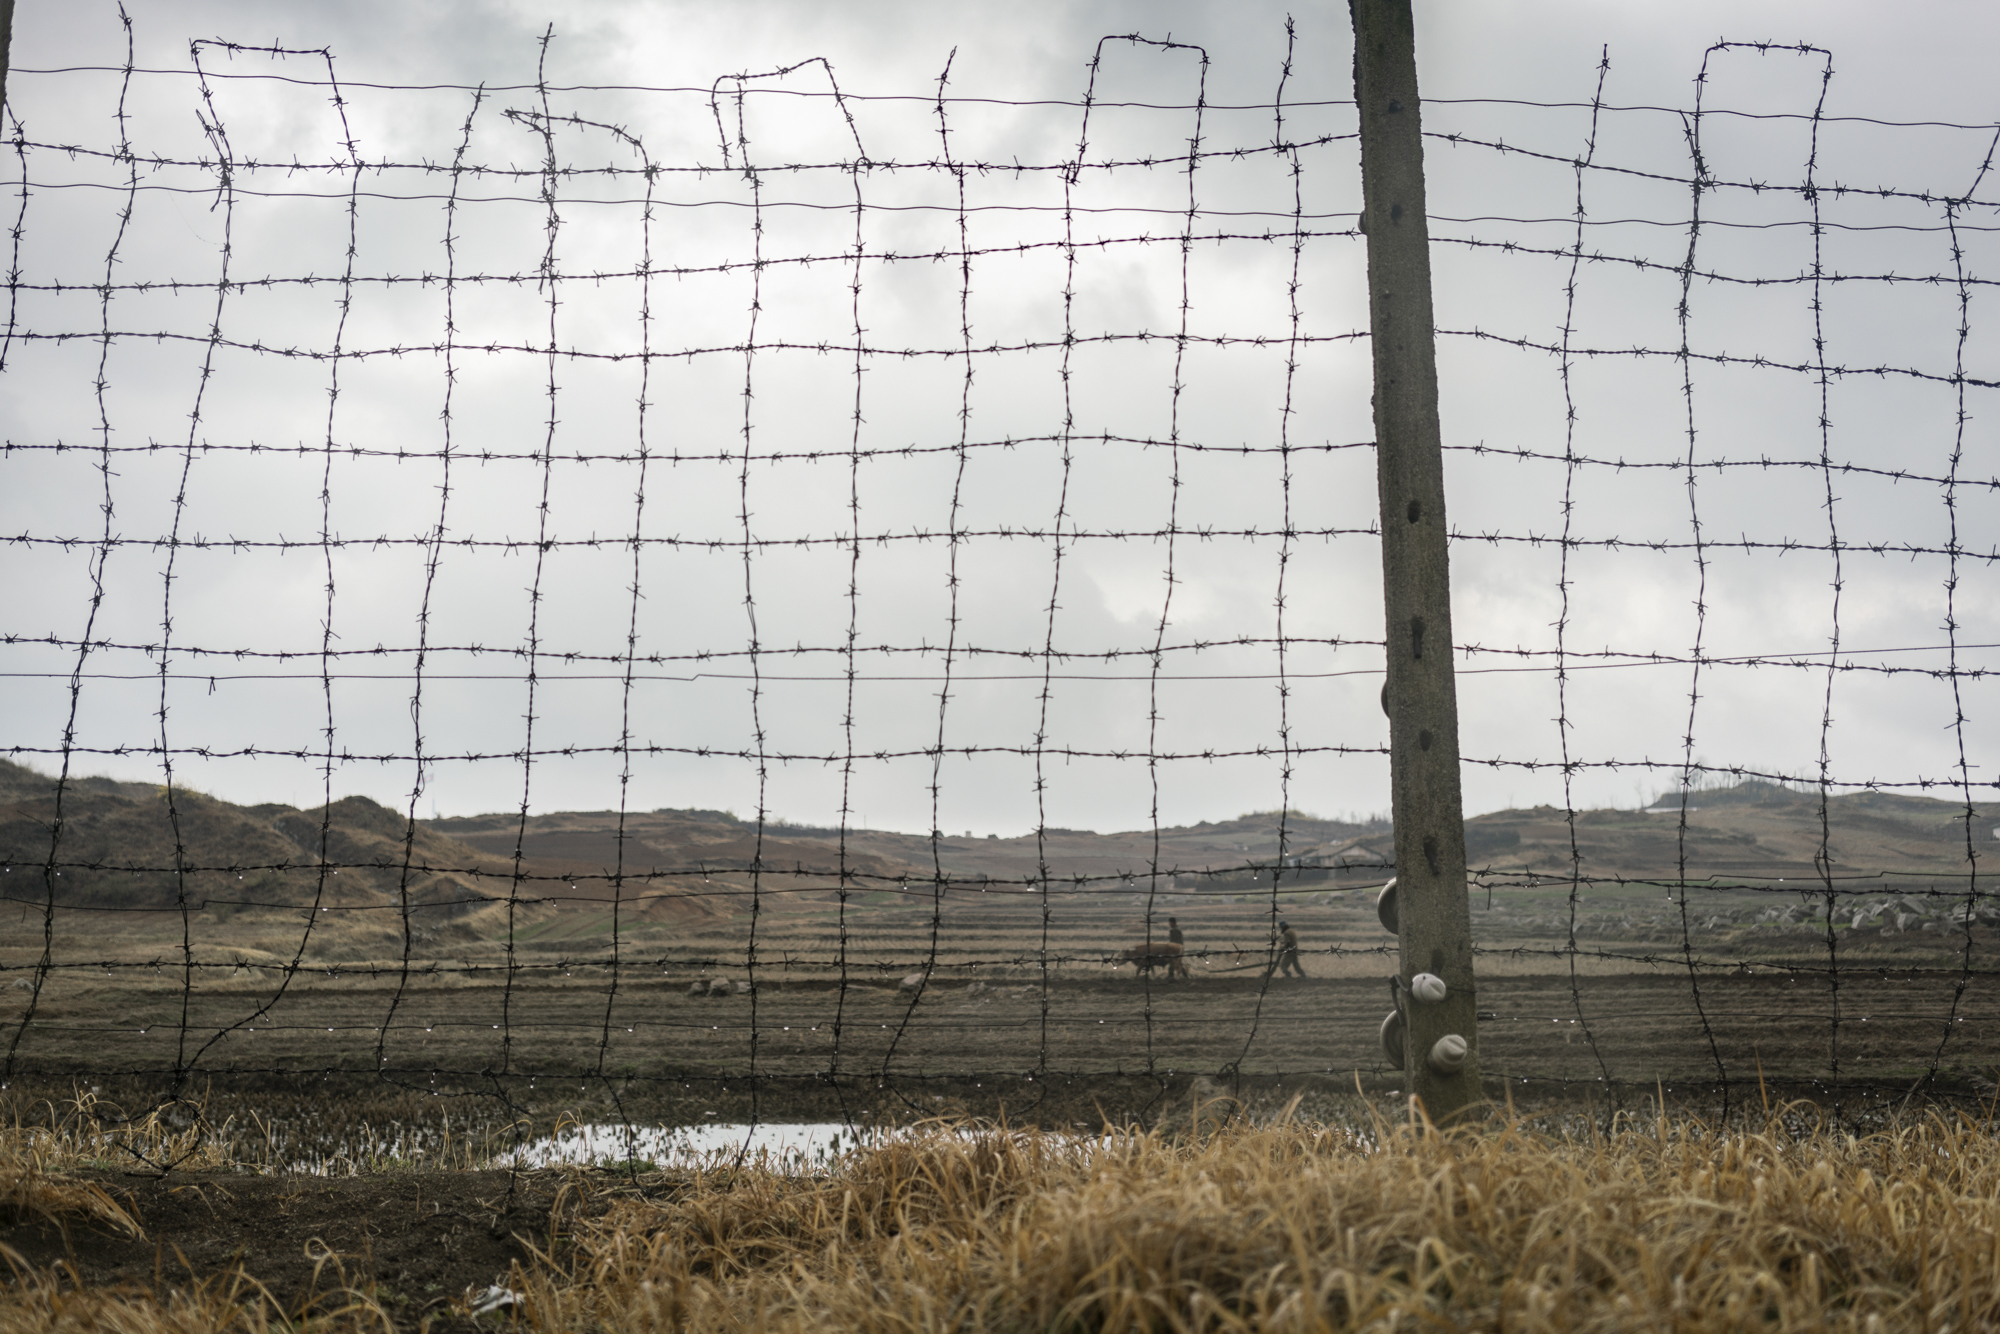  Behind the barbed wire, farmers work the land in Kijŏng-dong, also known in North Korea as “Peace Village”, one of the only two villages permitted to remain in the four-kilometre-wide DMZ laid out under the 1953 armistice ending the Korean War.   Ac